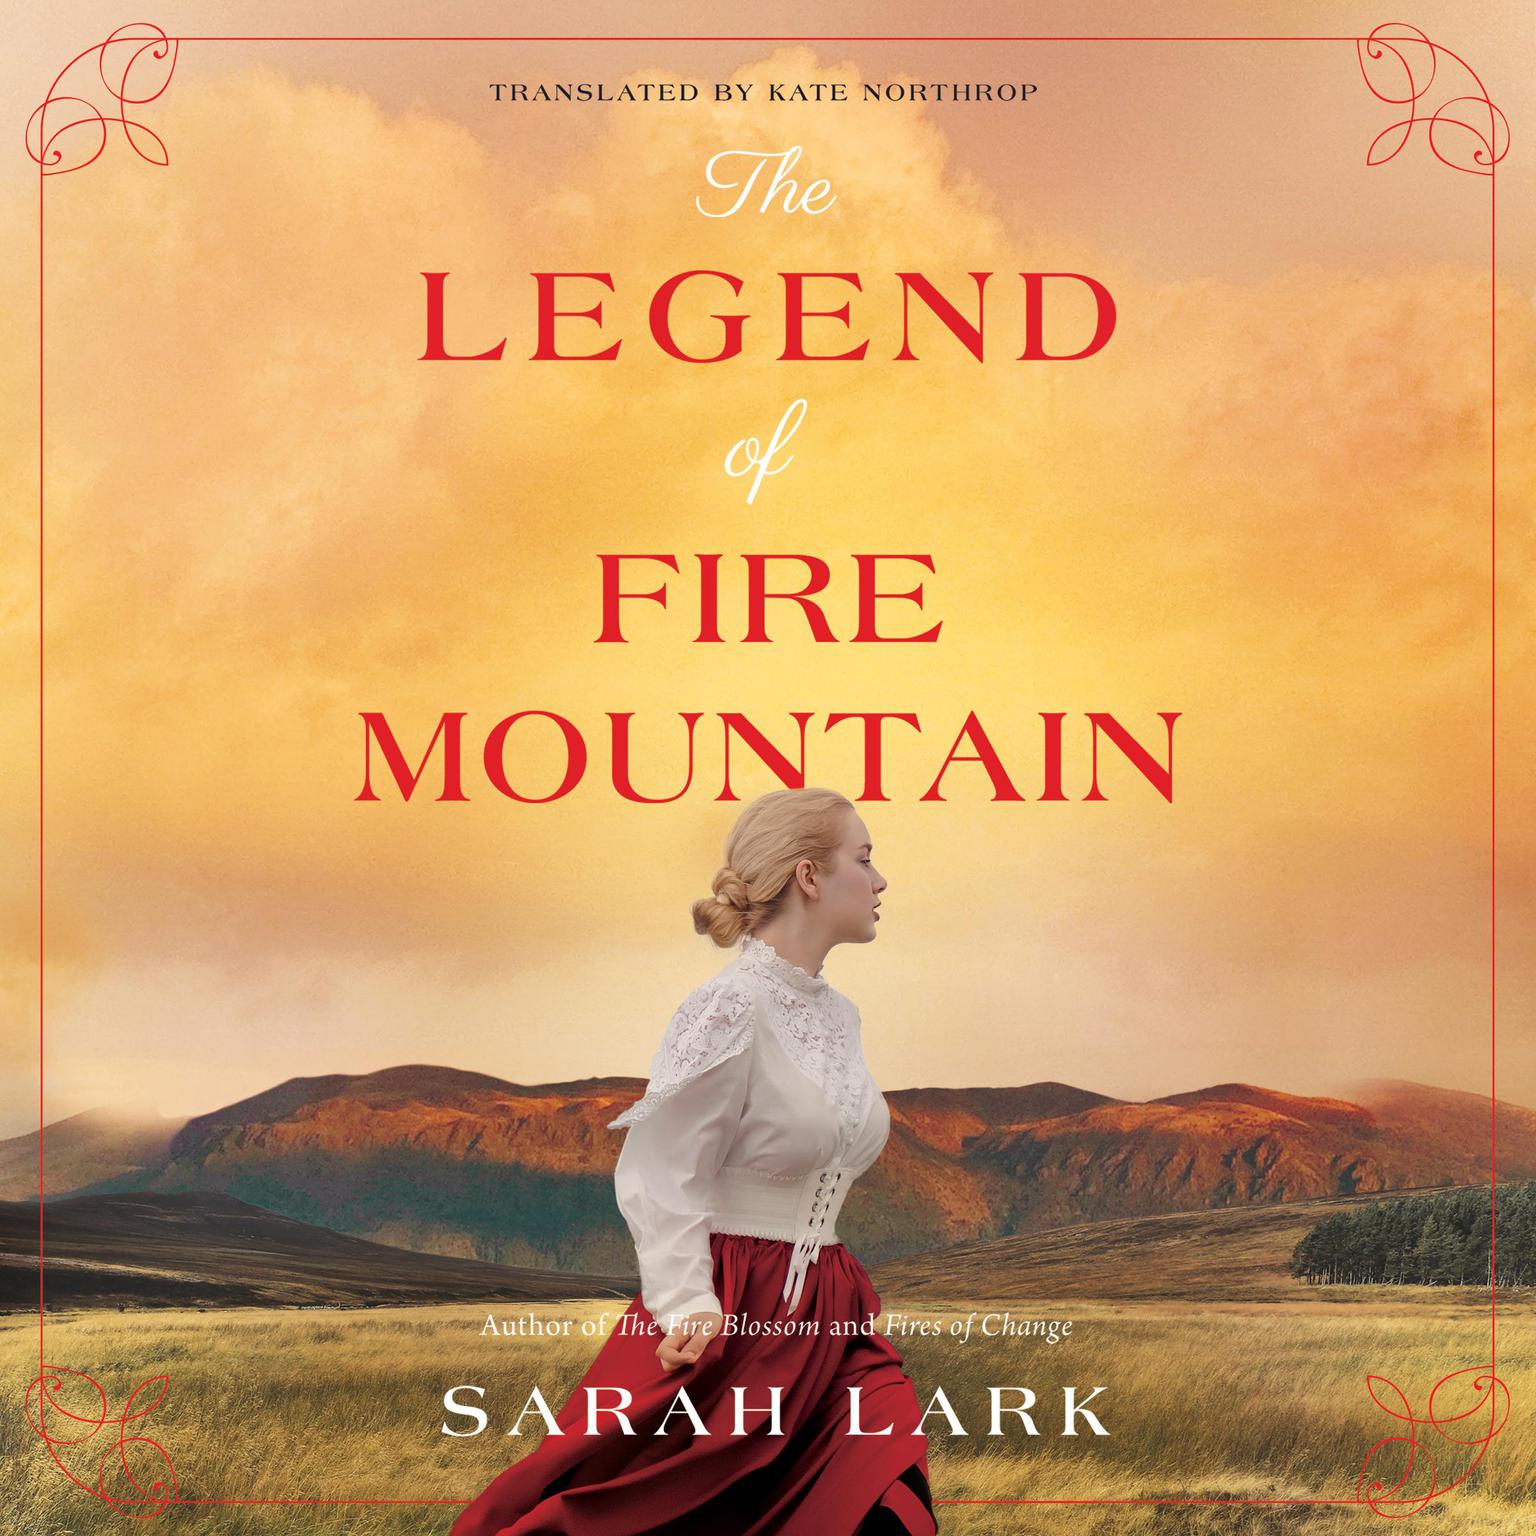 The Legend of Fire Mountain Audiobook, by Sarah Lark